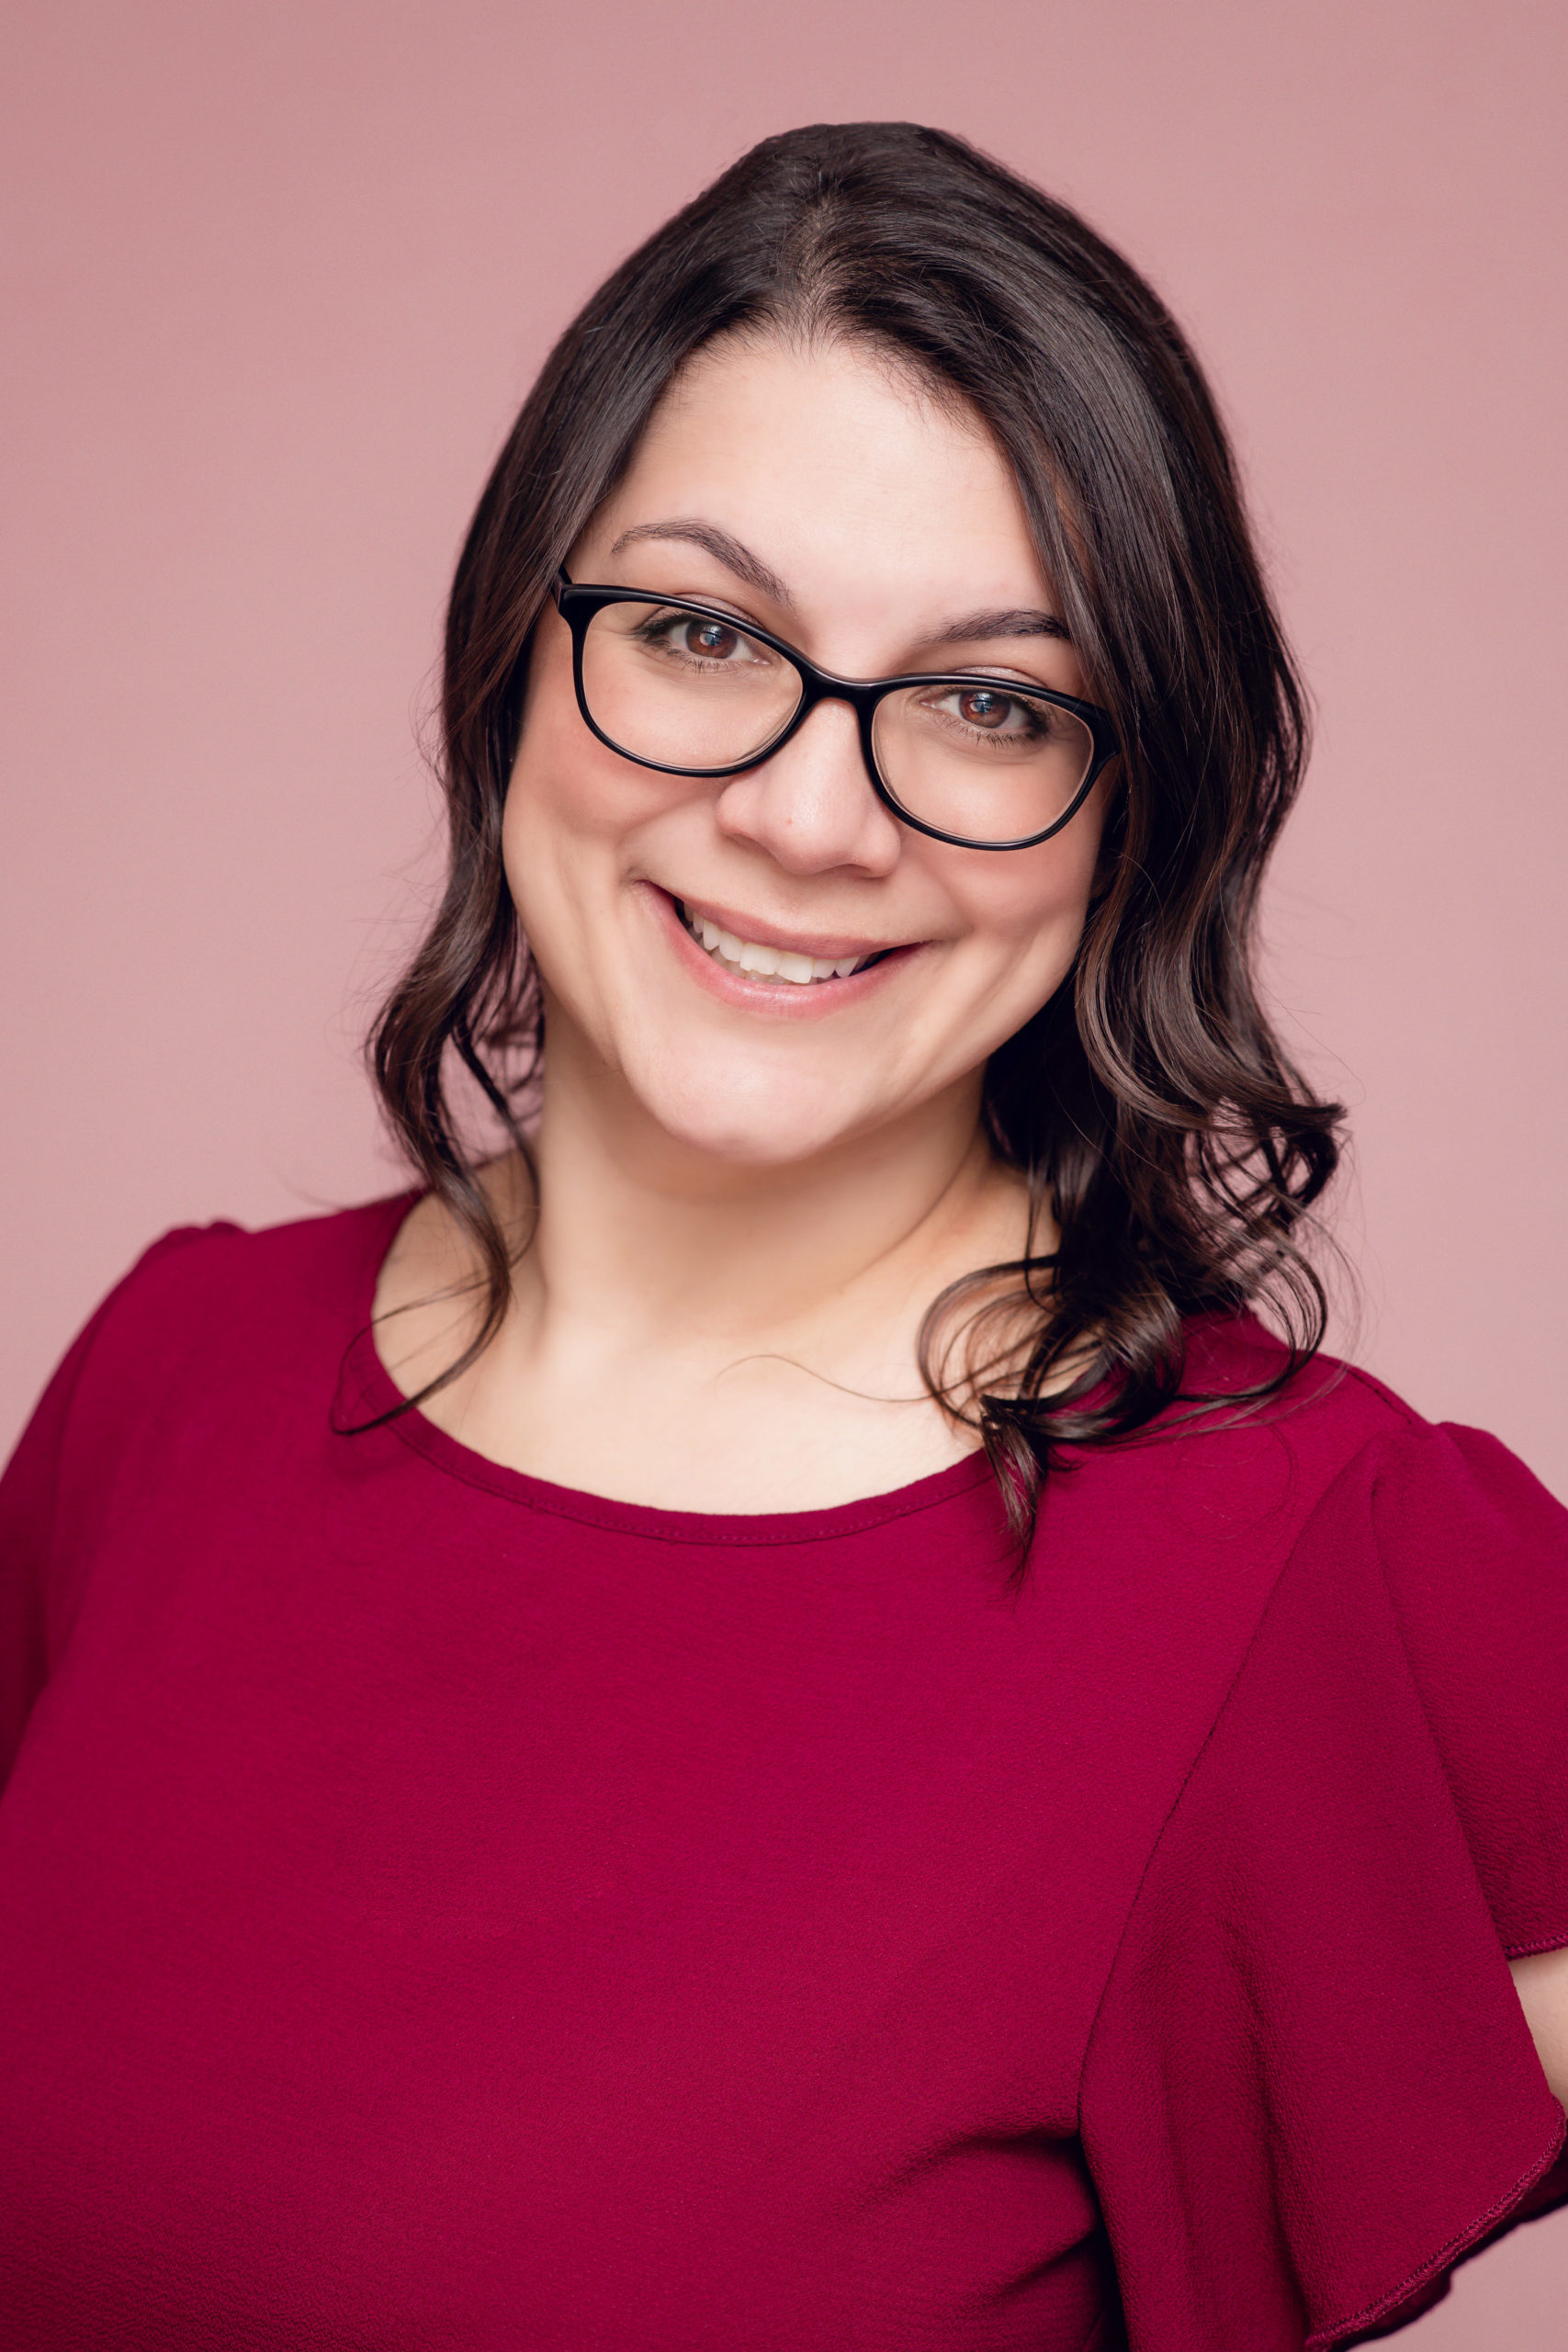 Gina Scarpa is a full-time female voice actor and award winning coach and director 